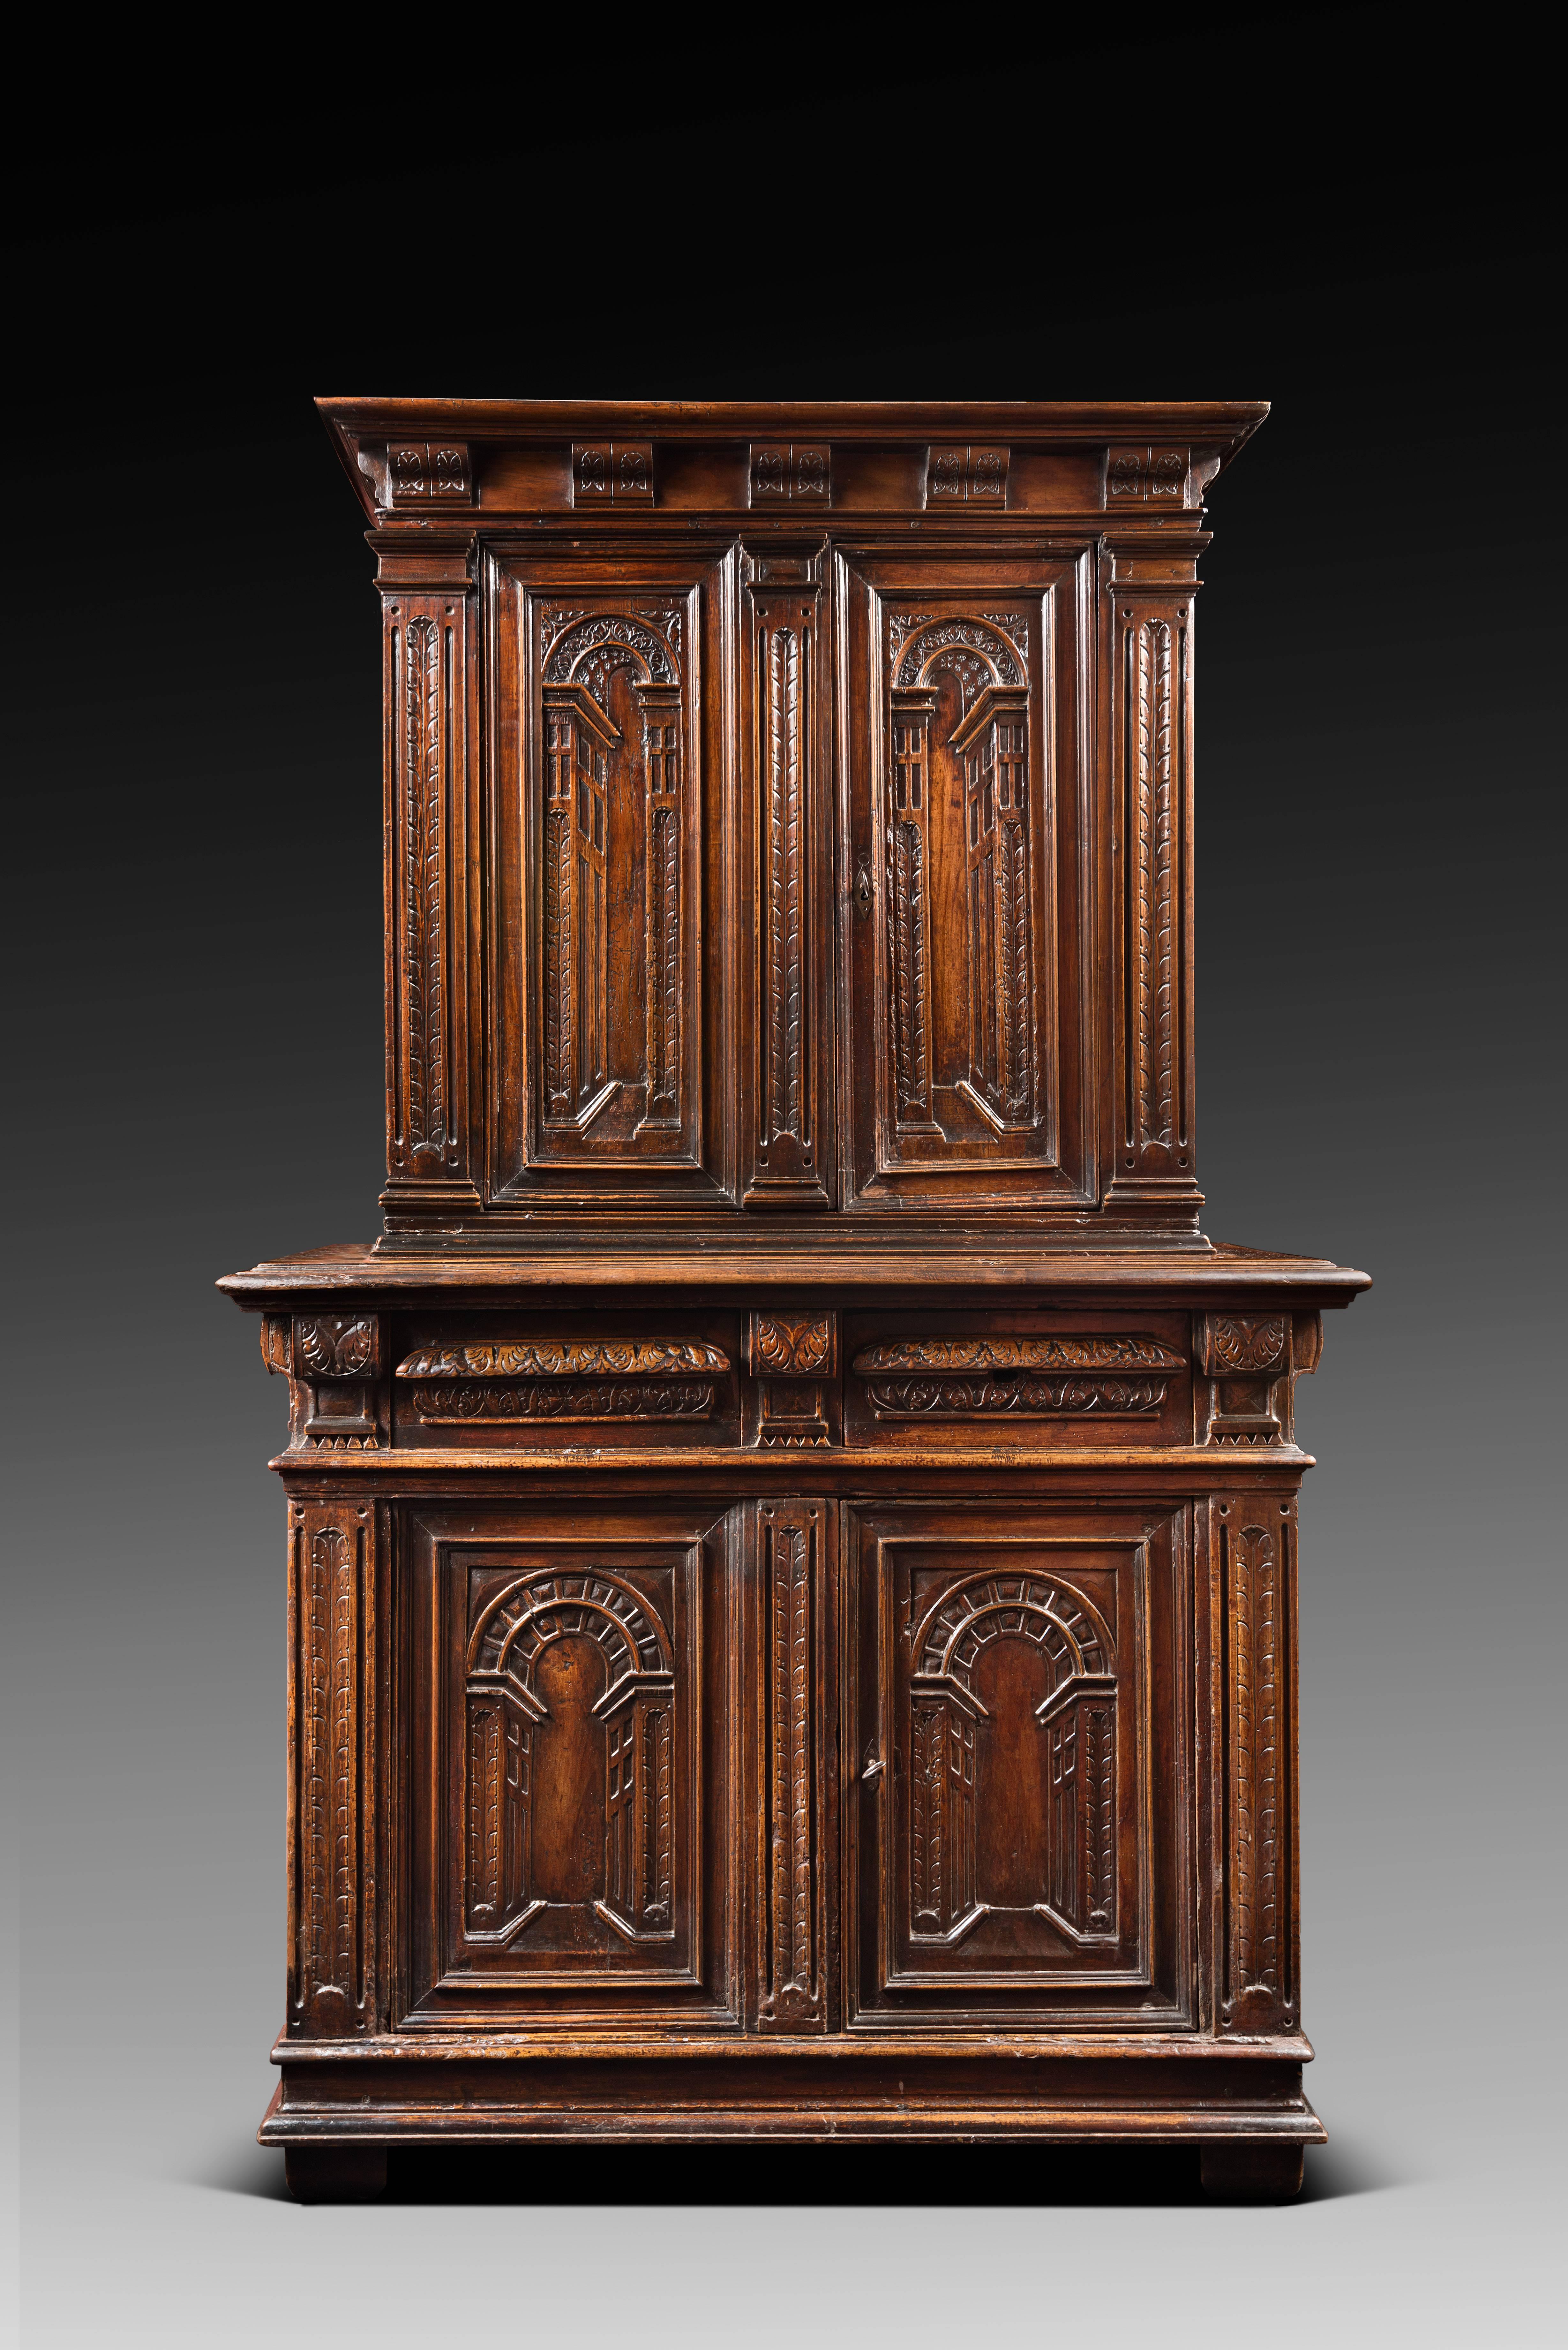 French Cabinet of Renaissance Period with Decor of Perspectives in 'Trompe l'oeil' For Sale